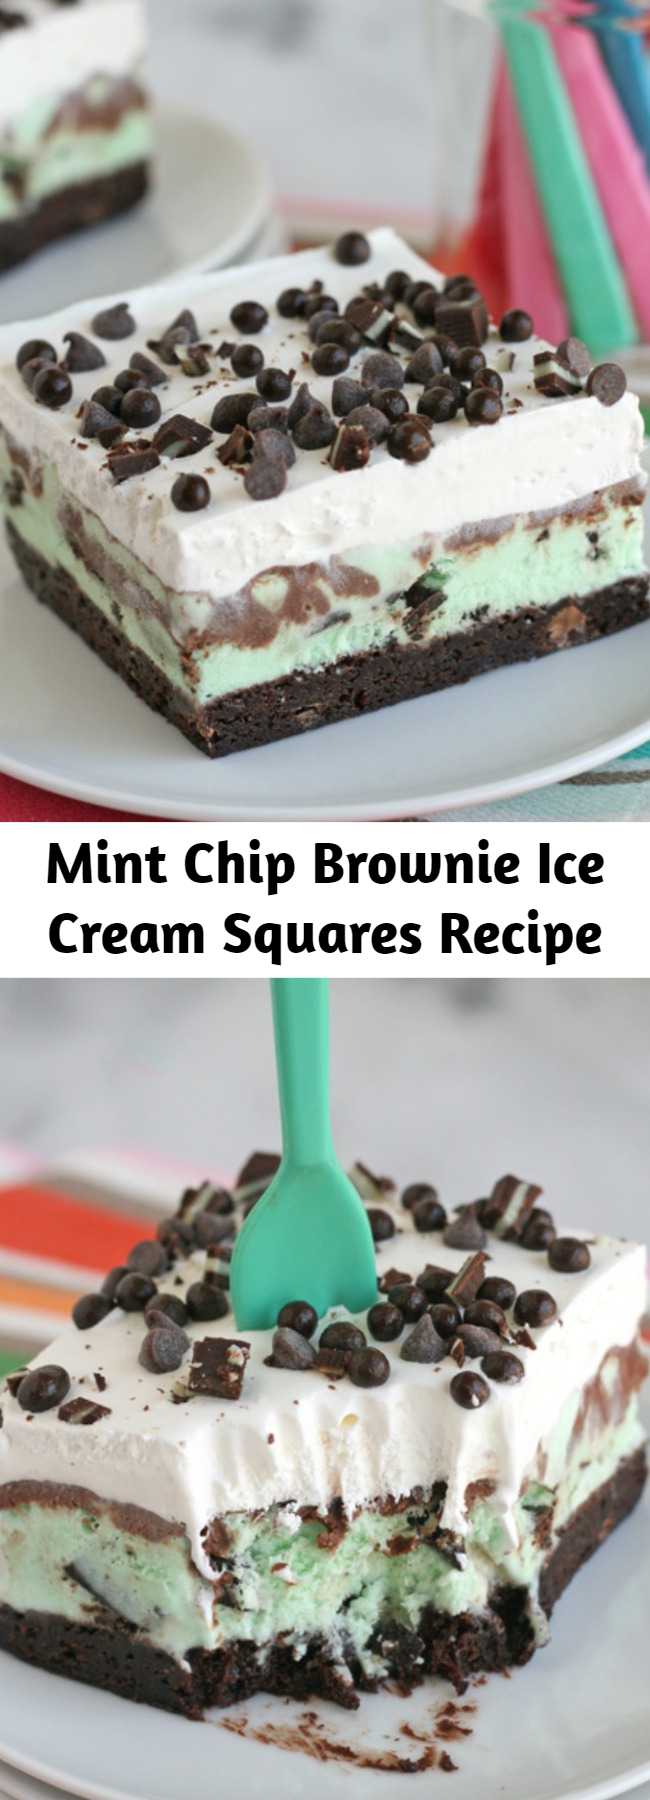 Mint Chip Brownie Ice Cream Squares Recipe - Mint chip ice cream is layered on fudge brownies, then topped with a layer of chocolate, whipped cream and mini chocolate chips. This is the PERFECT summer dessert!